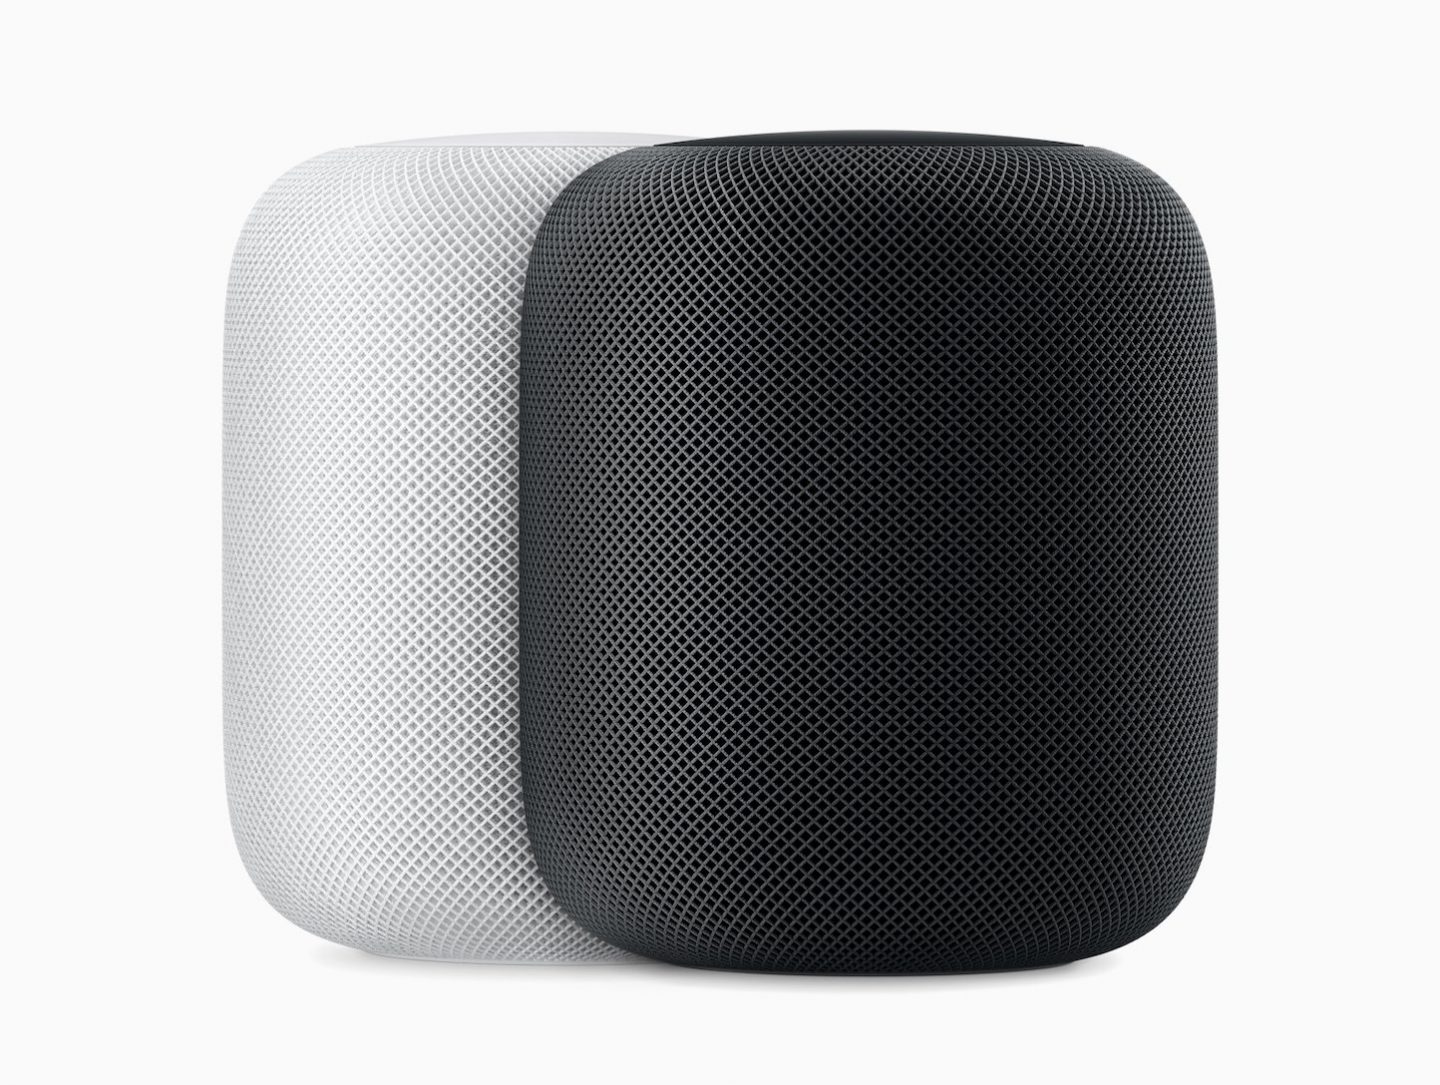 How to find iPhone with HomePod